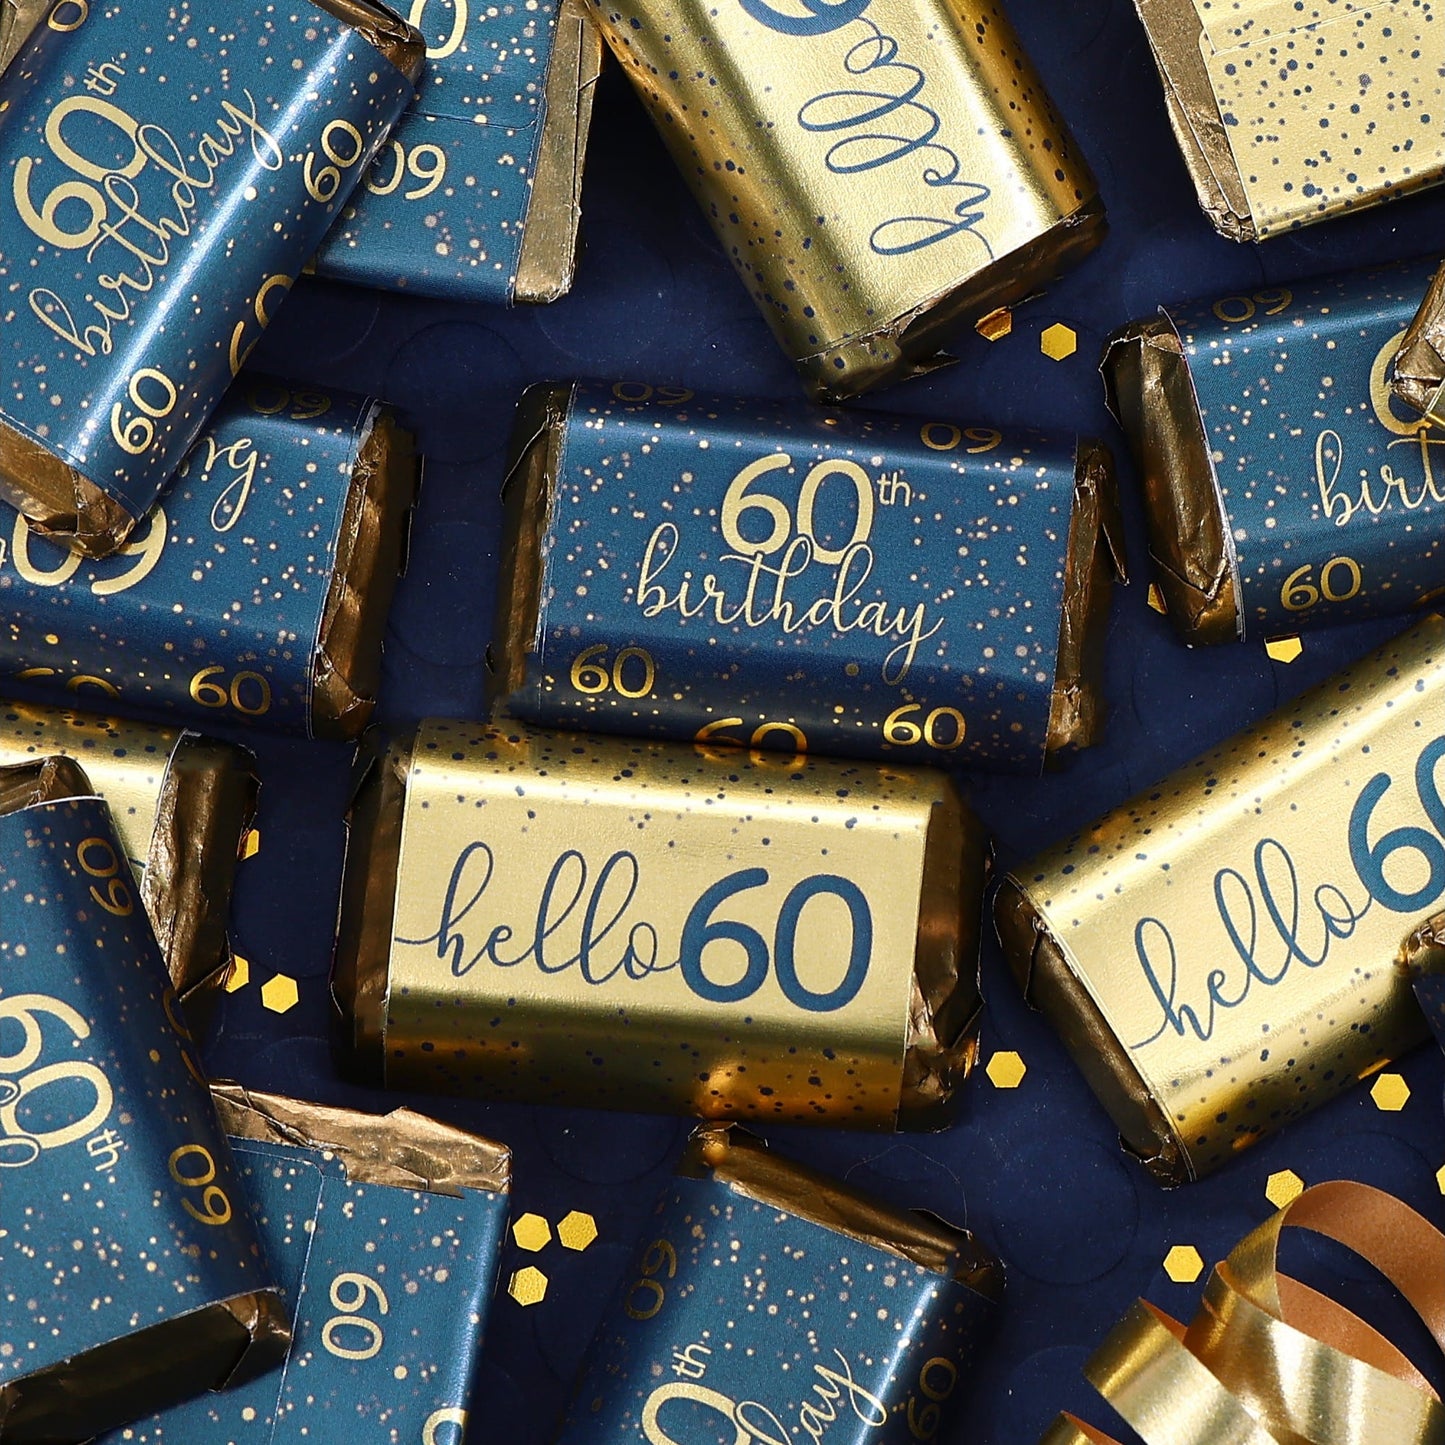 60th birthday navy blue and gold candy